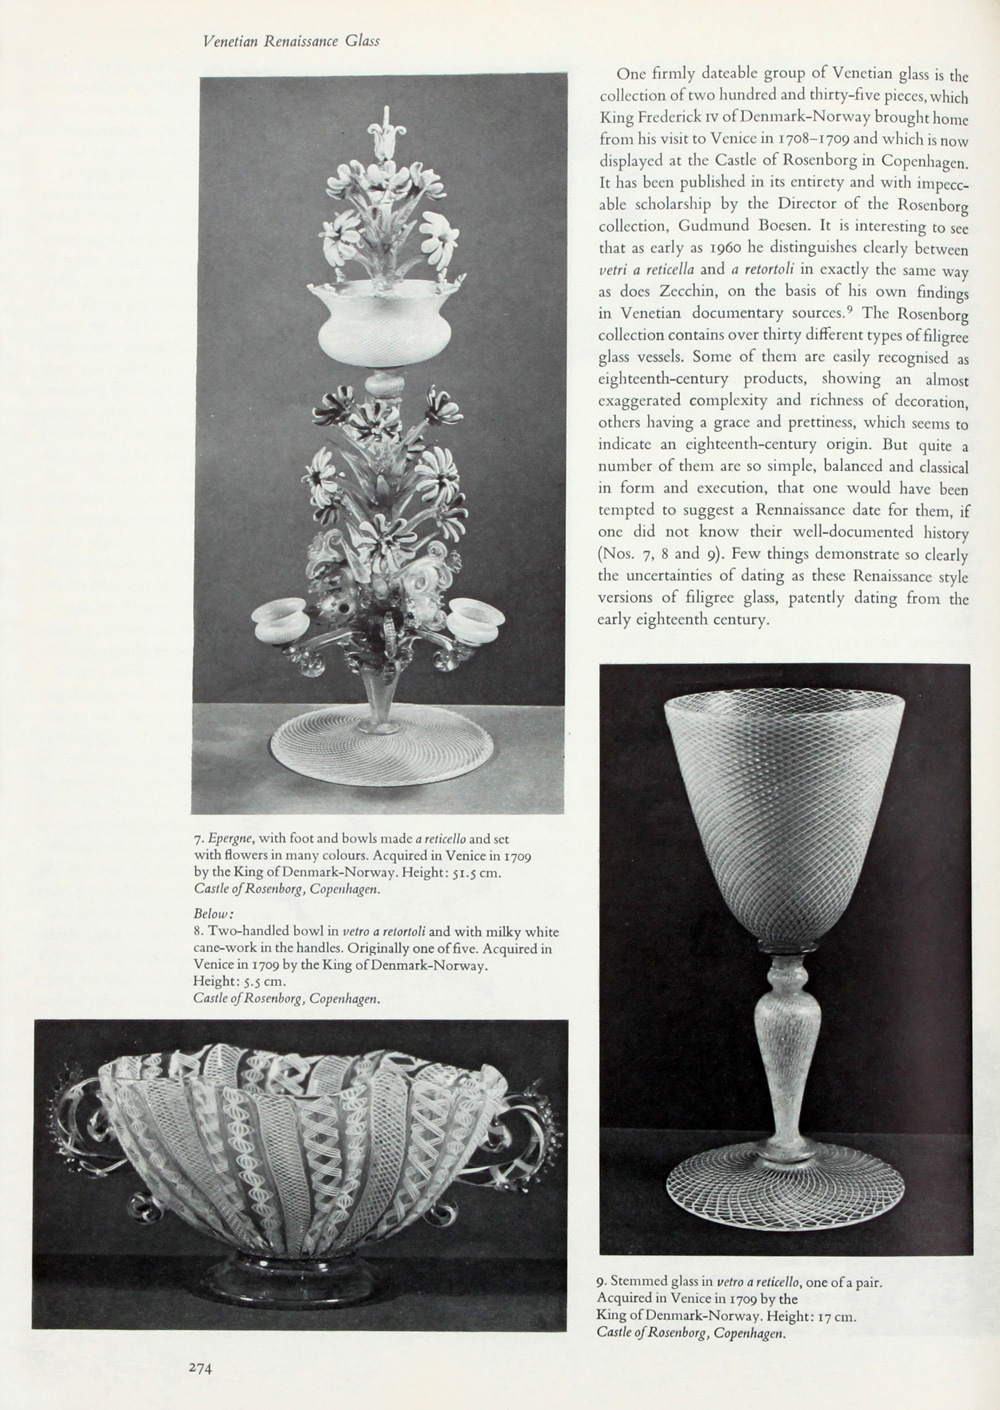 The CONNOISSEUR back issues - August 1976 - Venetian Renaissance Glass - problems of dating vetro a filigrana by Ada Polak - Page 274